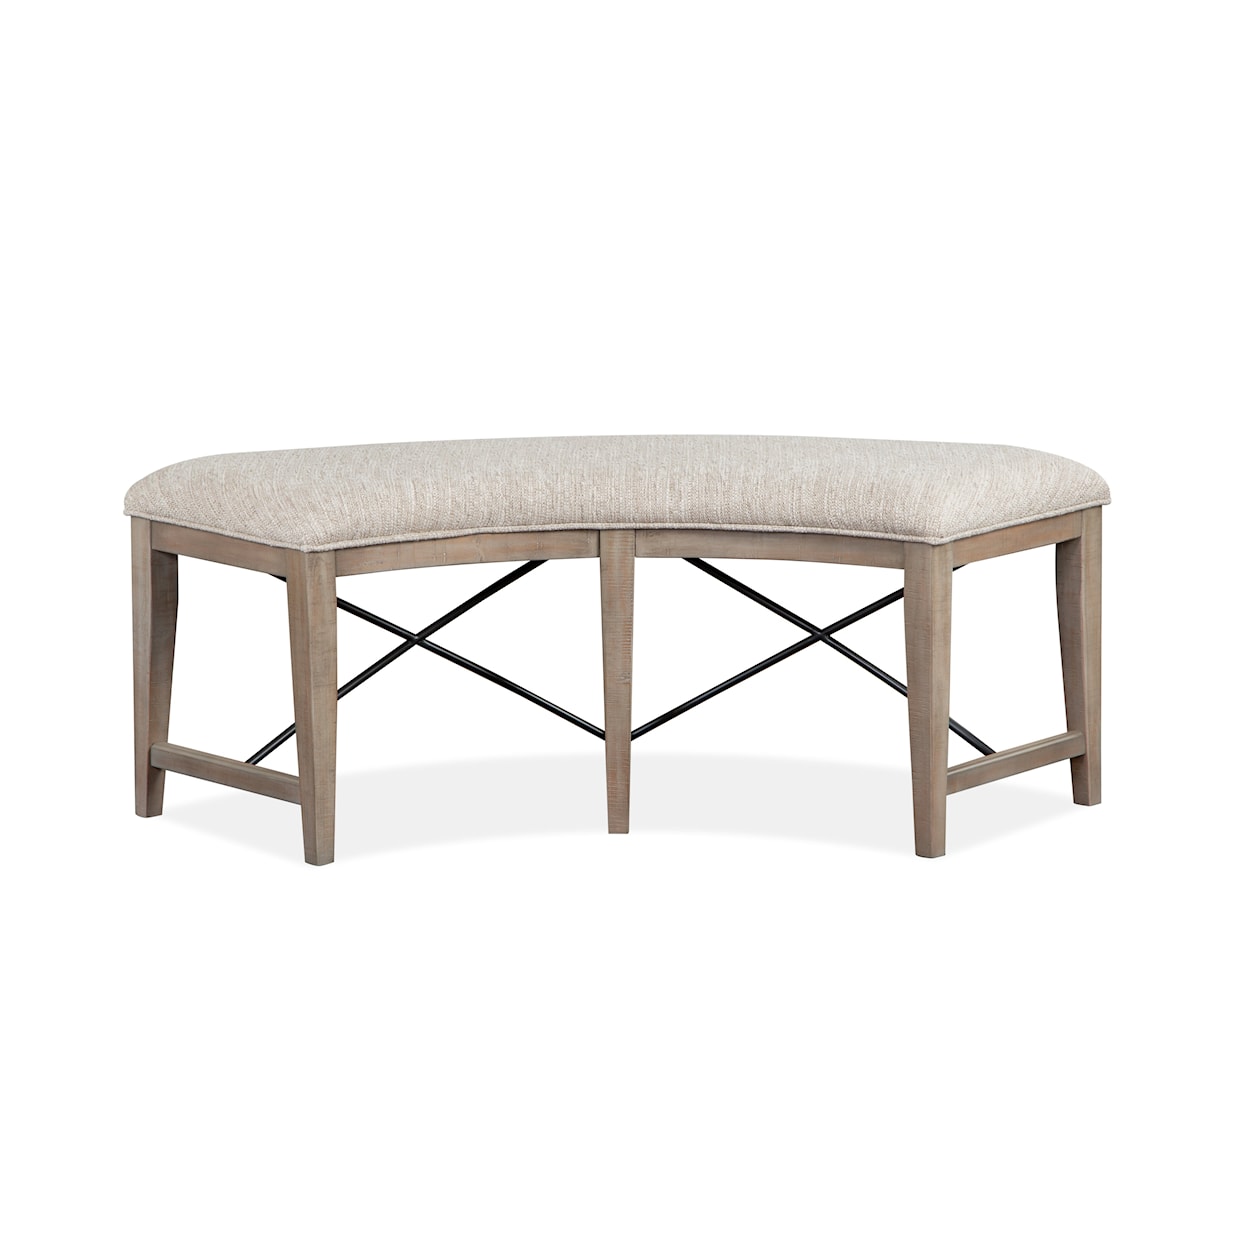 Magnussen Home Paxton Place Dining Upholstered Curved Bench 